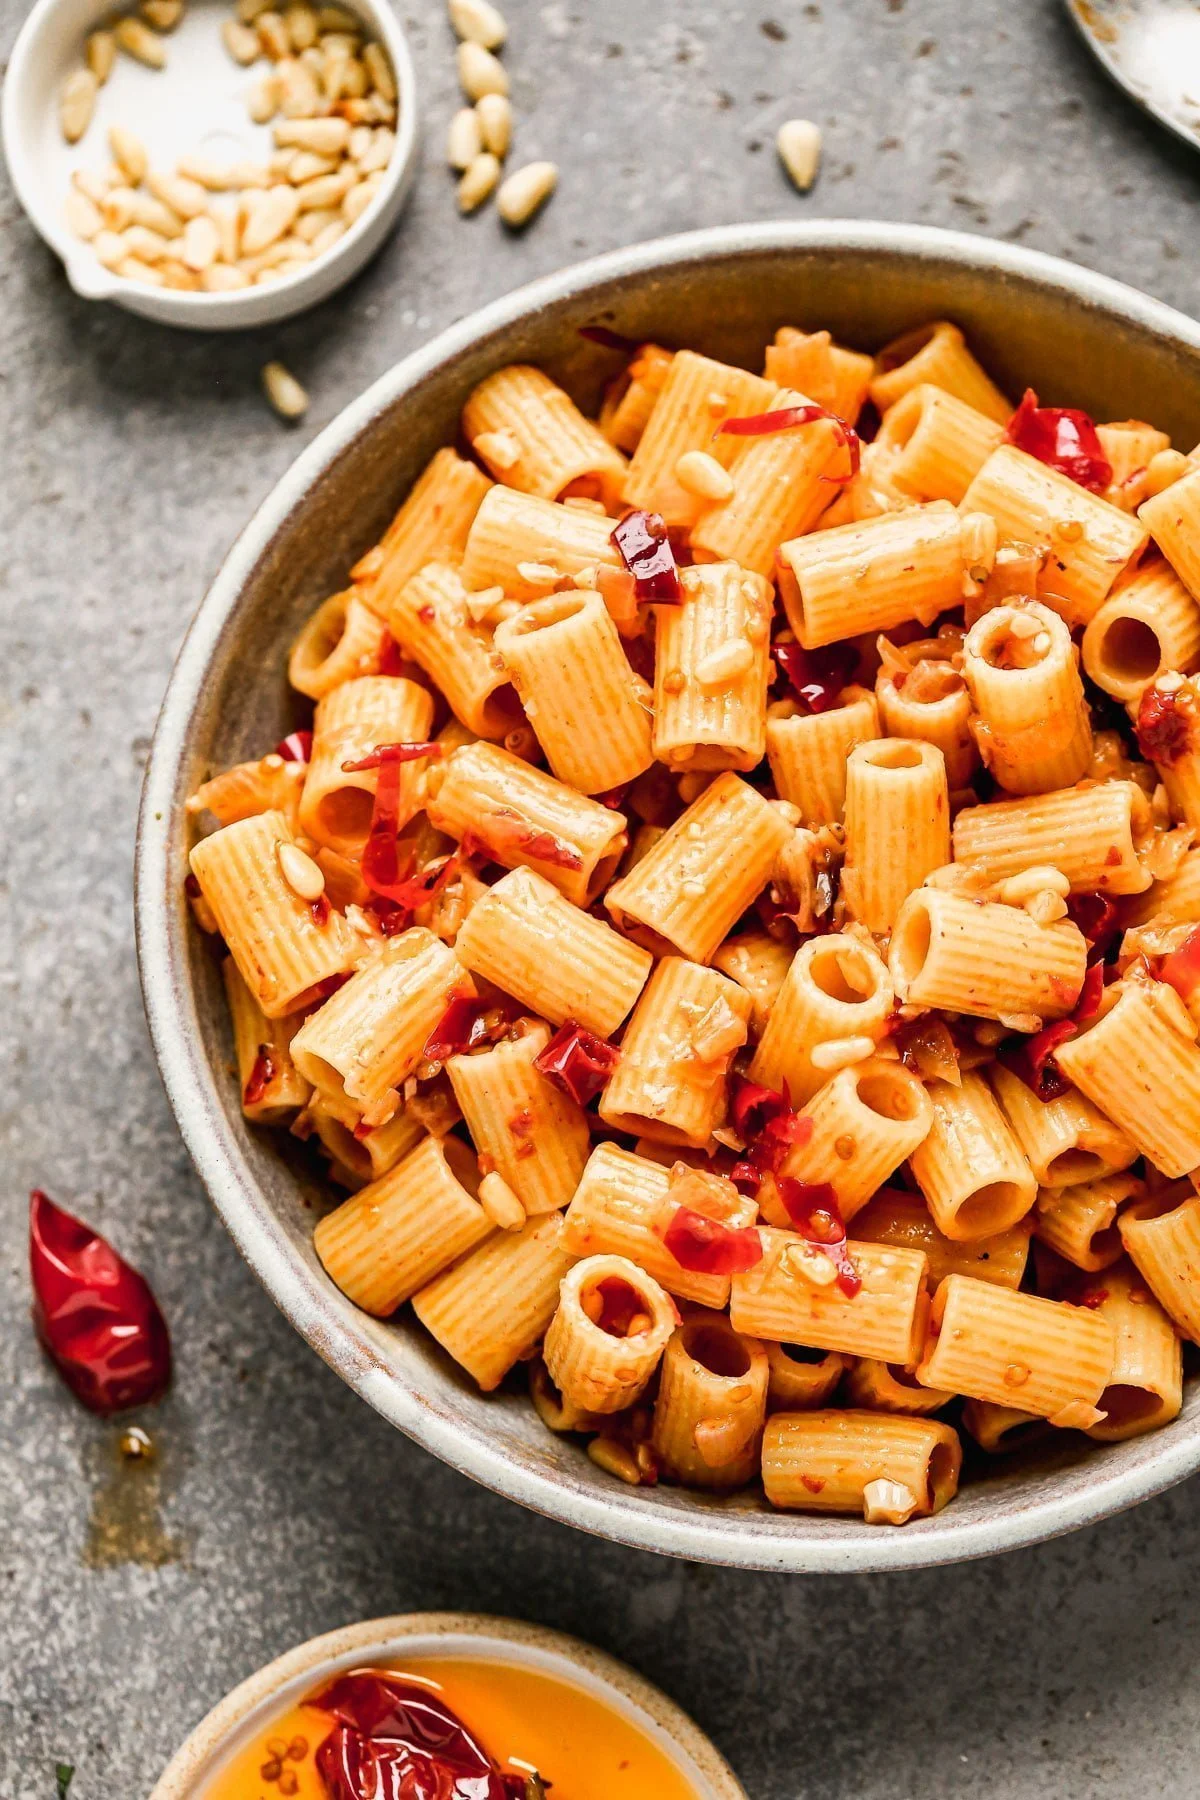 Calabrian Chili Pasta: This simple pasta requires just six ingredients and despite the minimal ingredient list, the flavor is next level with ultra spicy Calabrian chilis, nutty parmesan cheese, and a heavy hand of garlic. 